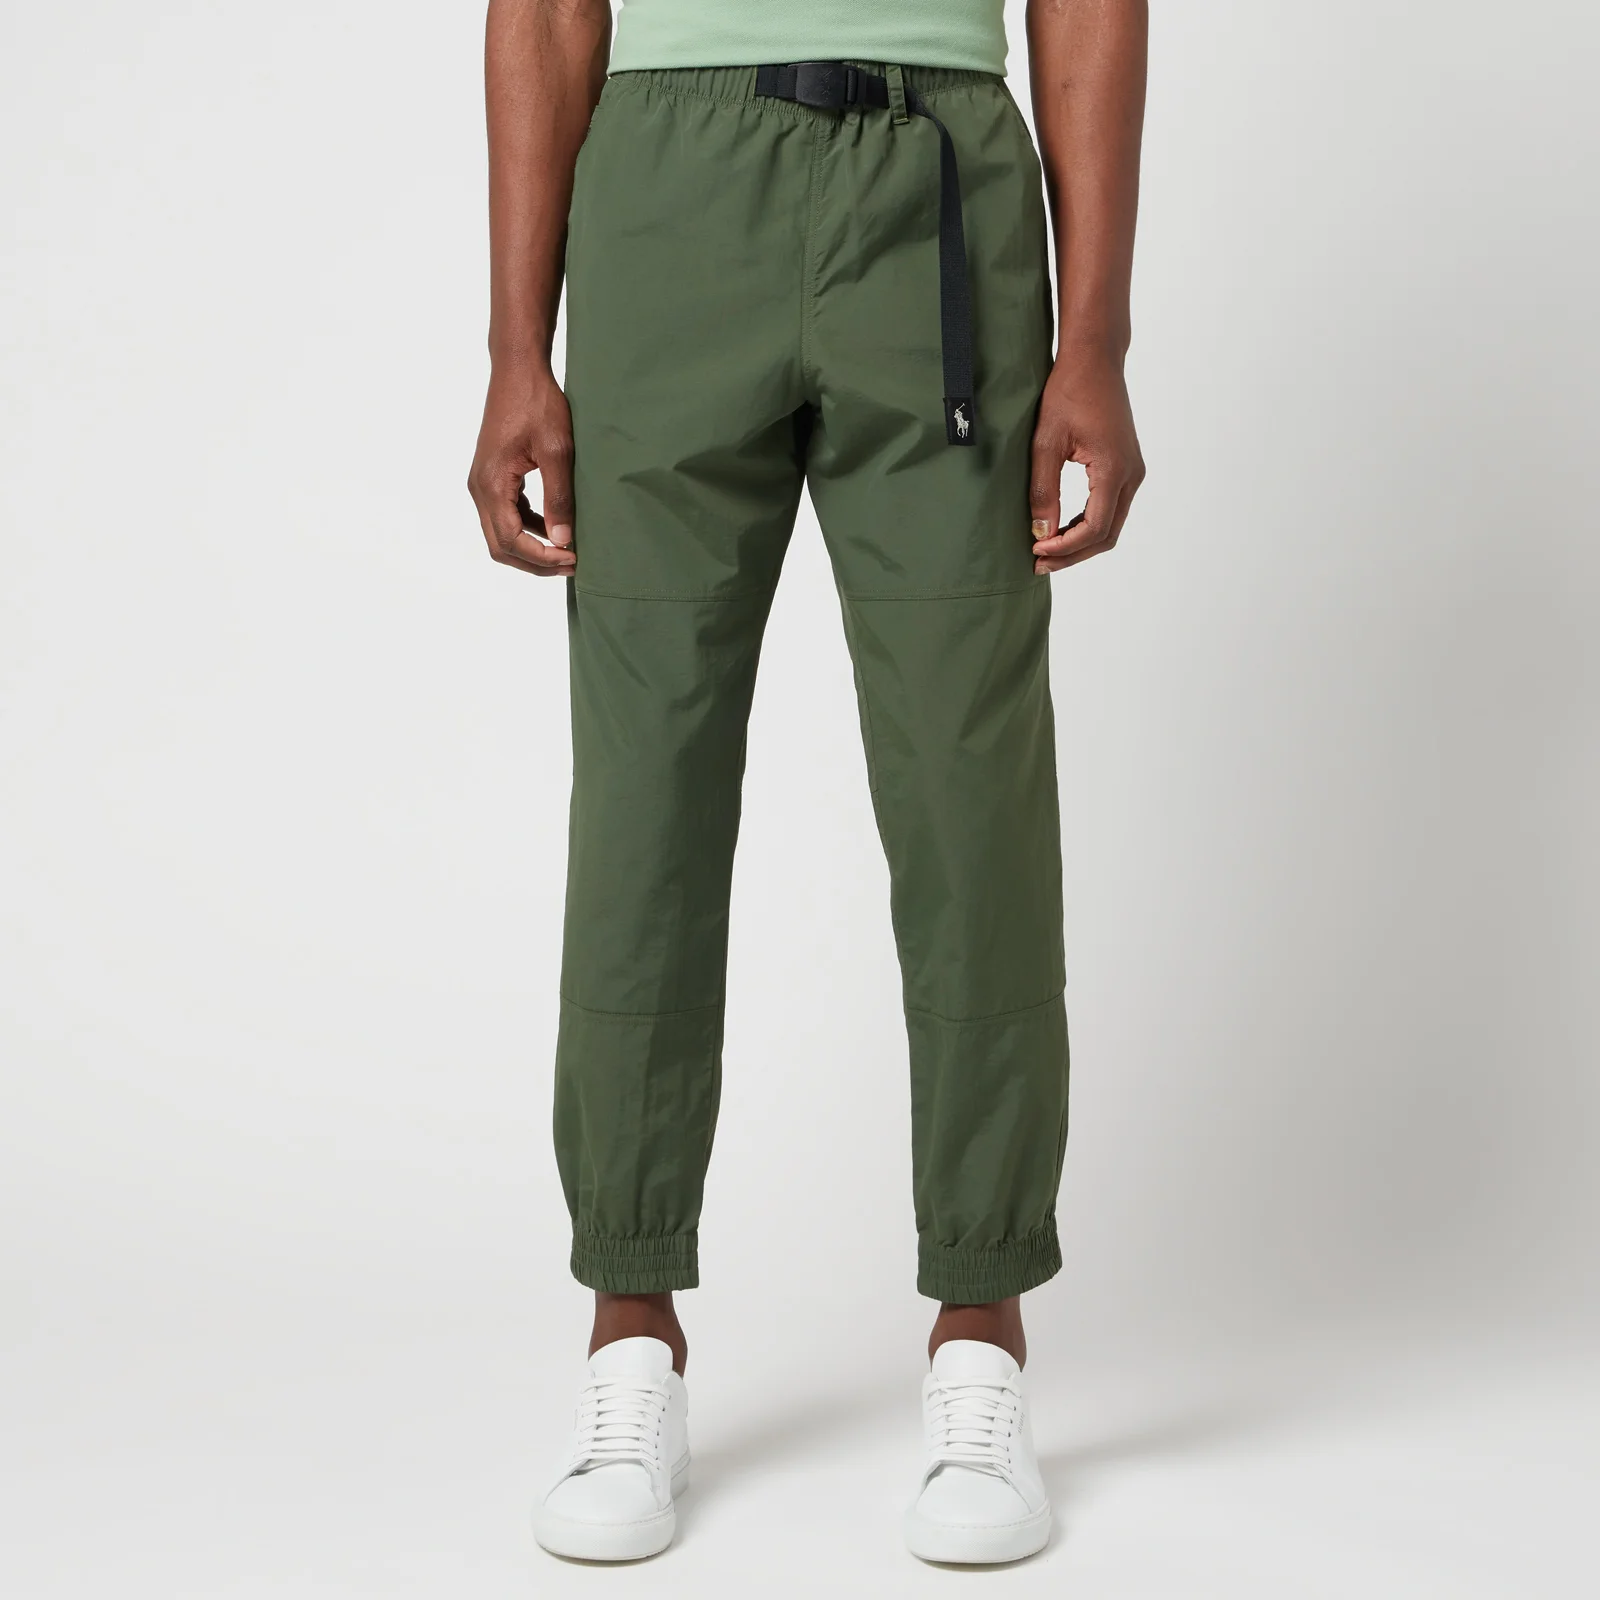 Polo Ralph Lauren Men's Tapered Hiking Trousers - Army Image 1